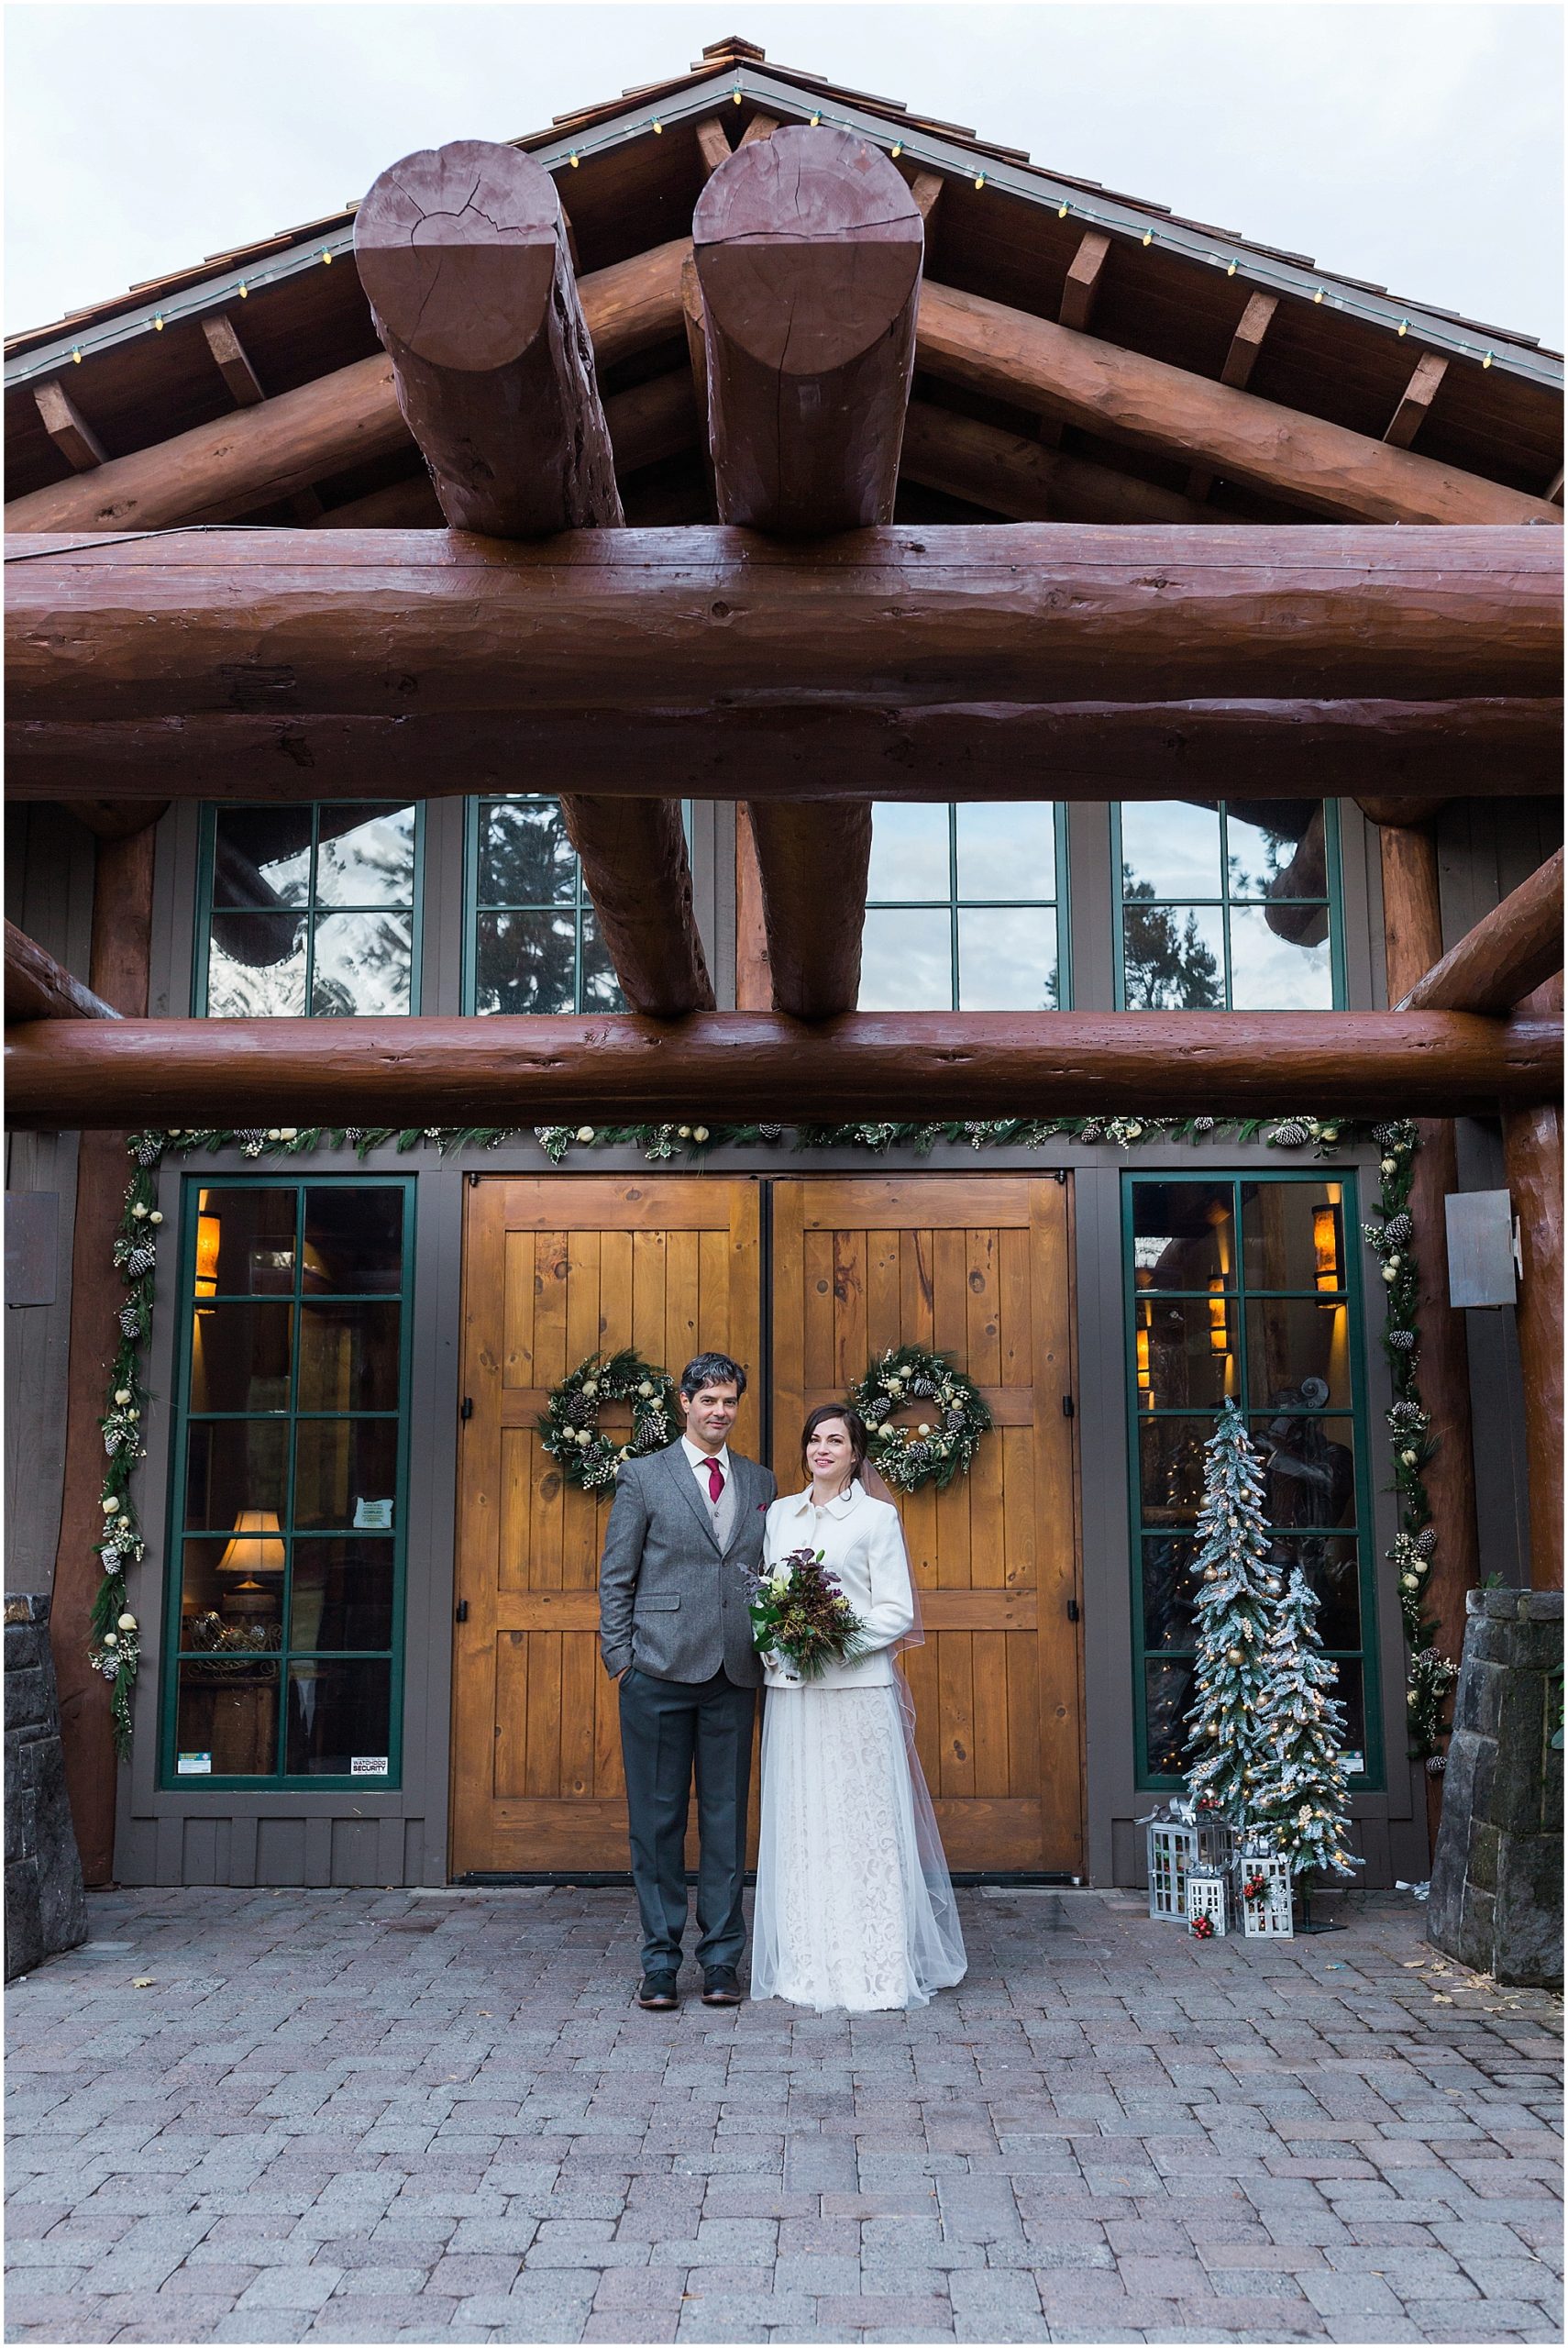 Sunriver Resort is all decorated for the holiday season and makes for a beautiful wedding portrait of the happy couple. | Erica Swantek Photography